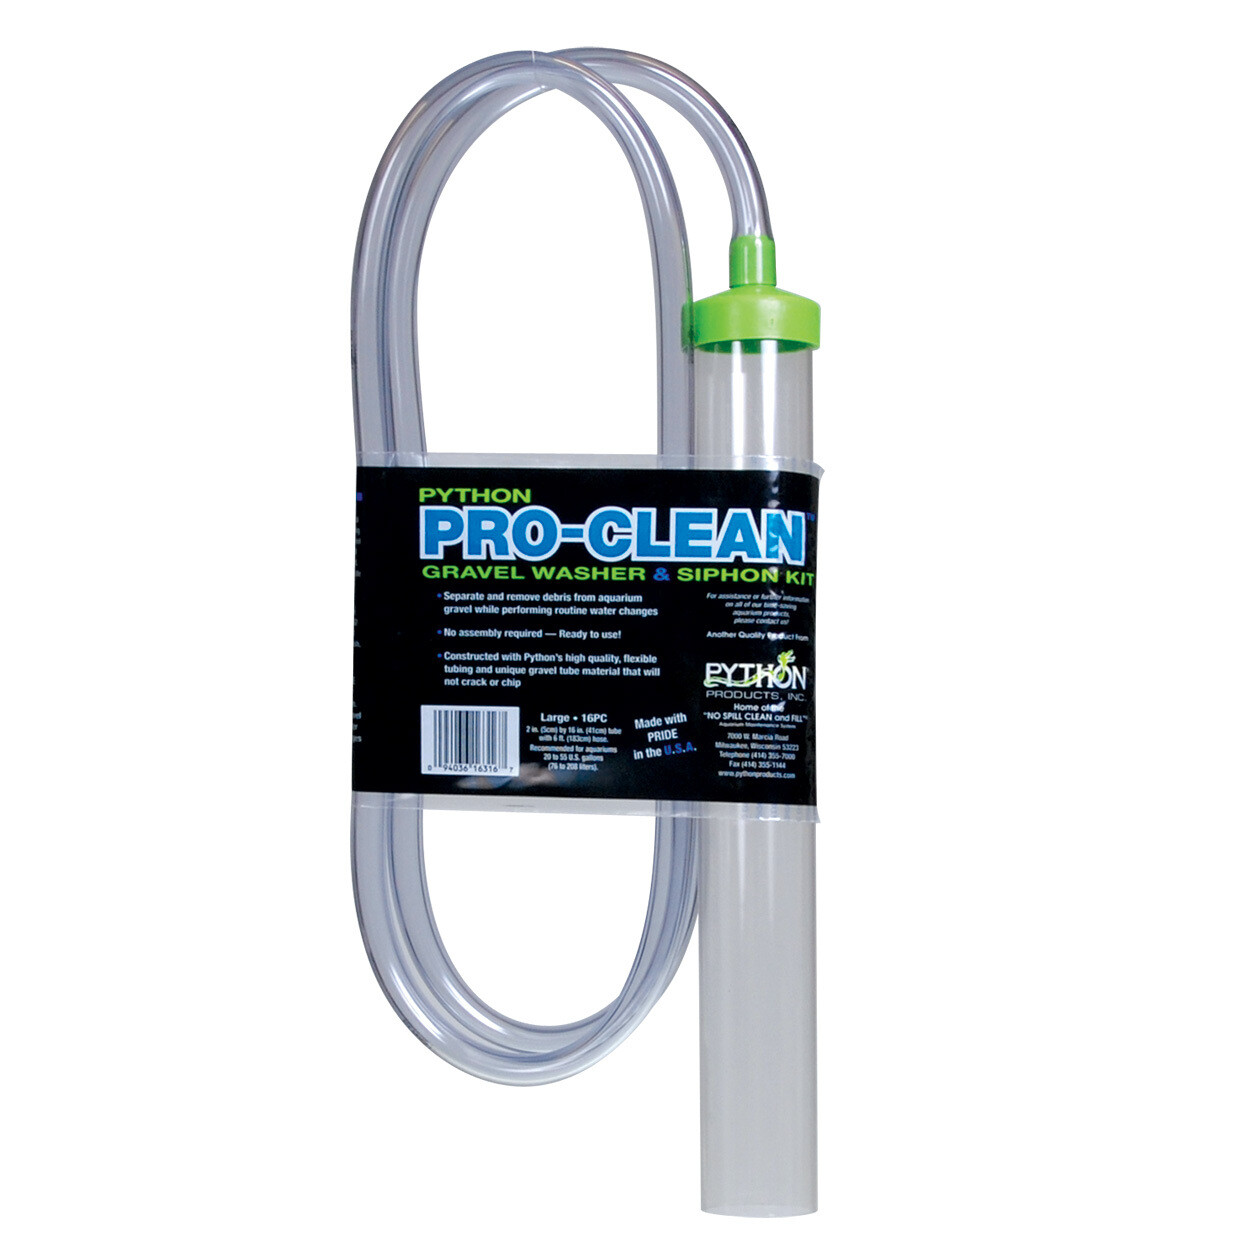 Python Pro-Clean Gravel Washer & Siphon Large